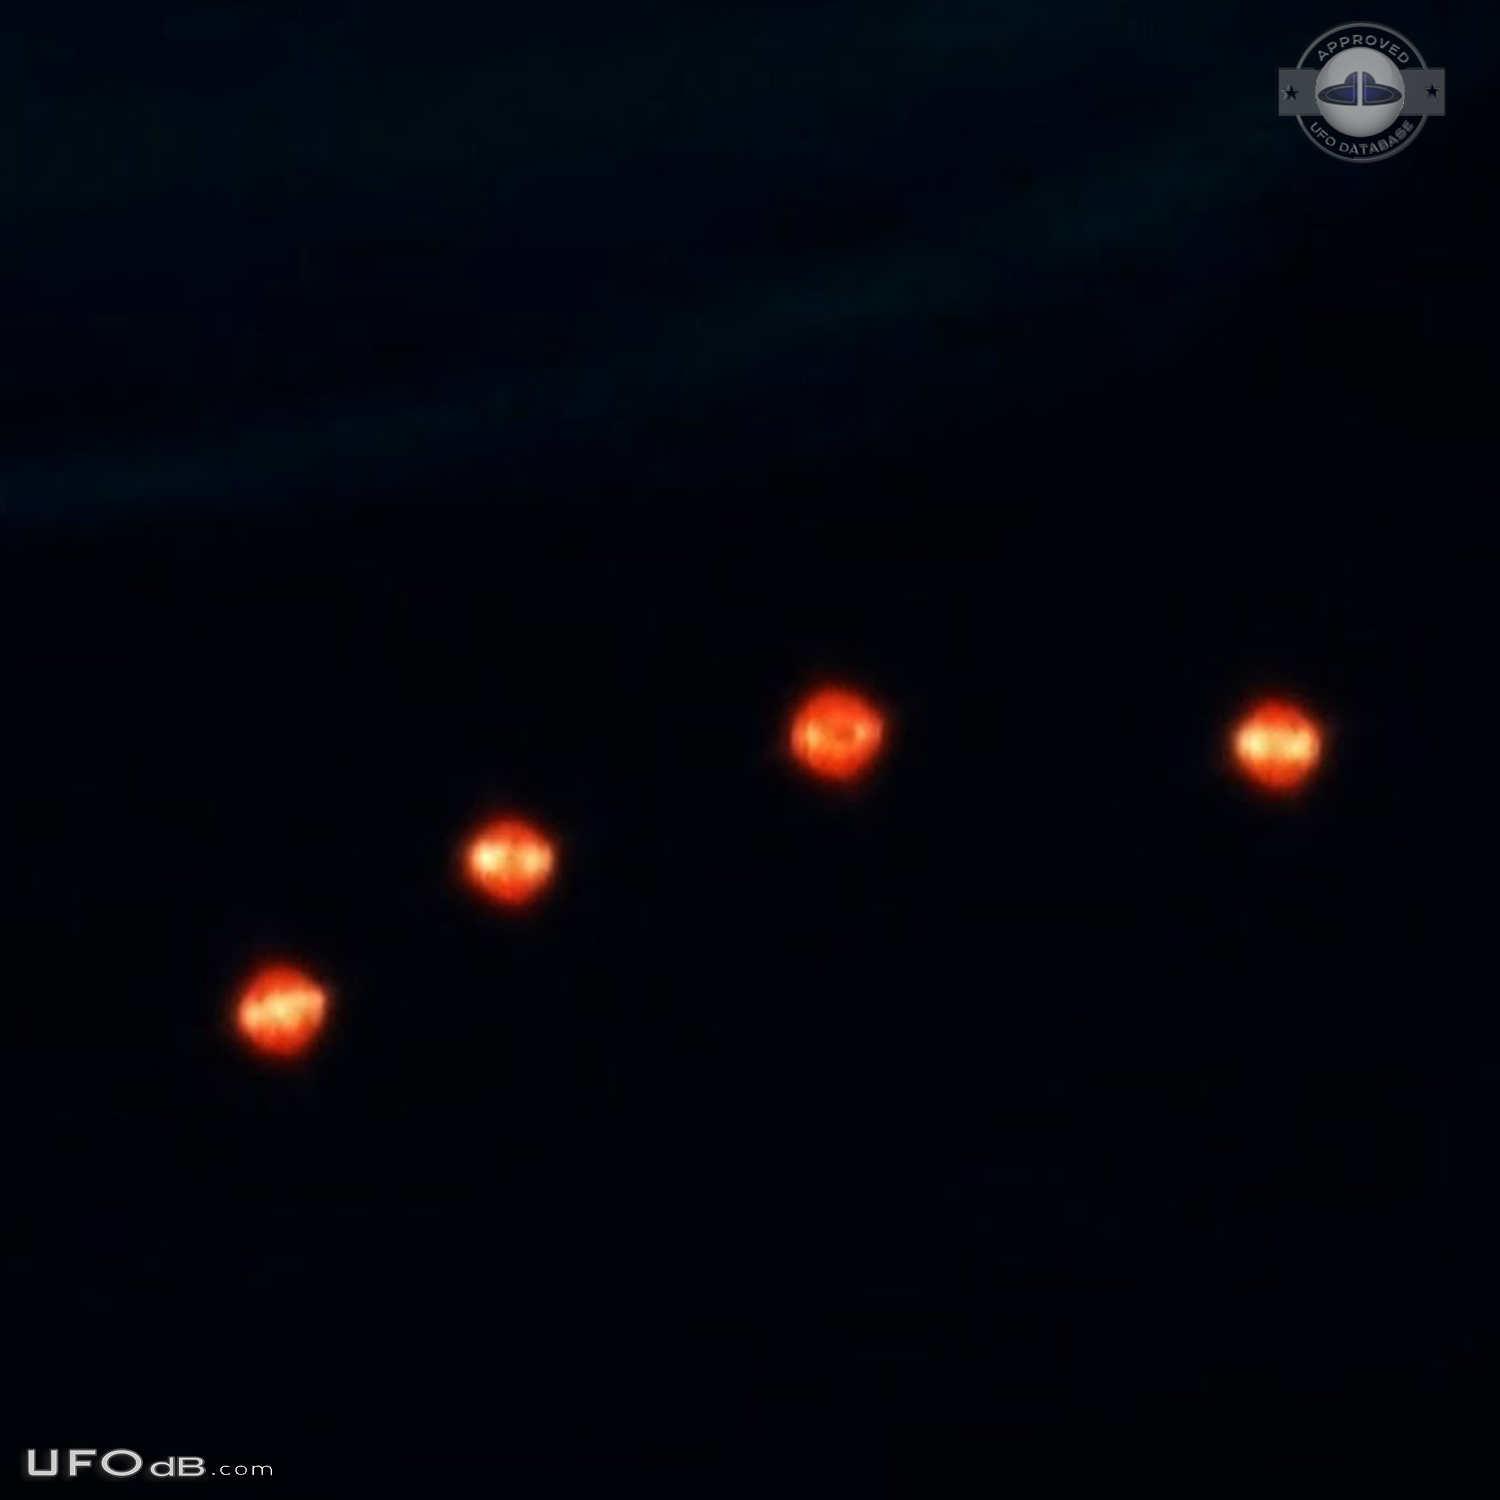 Unusual bright lights UFO not shooting stars or satellites look like t UFO Picture #723-3